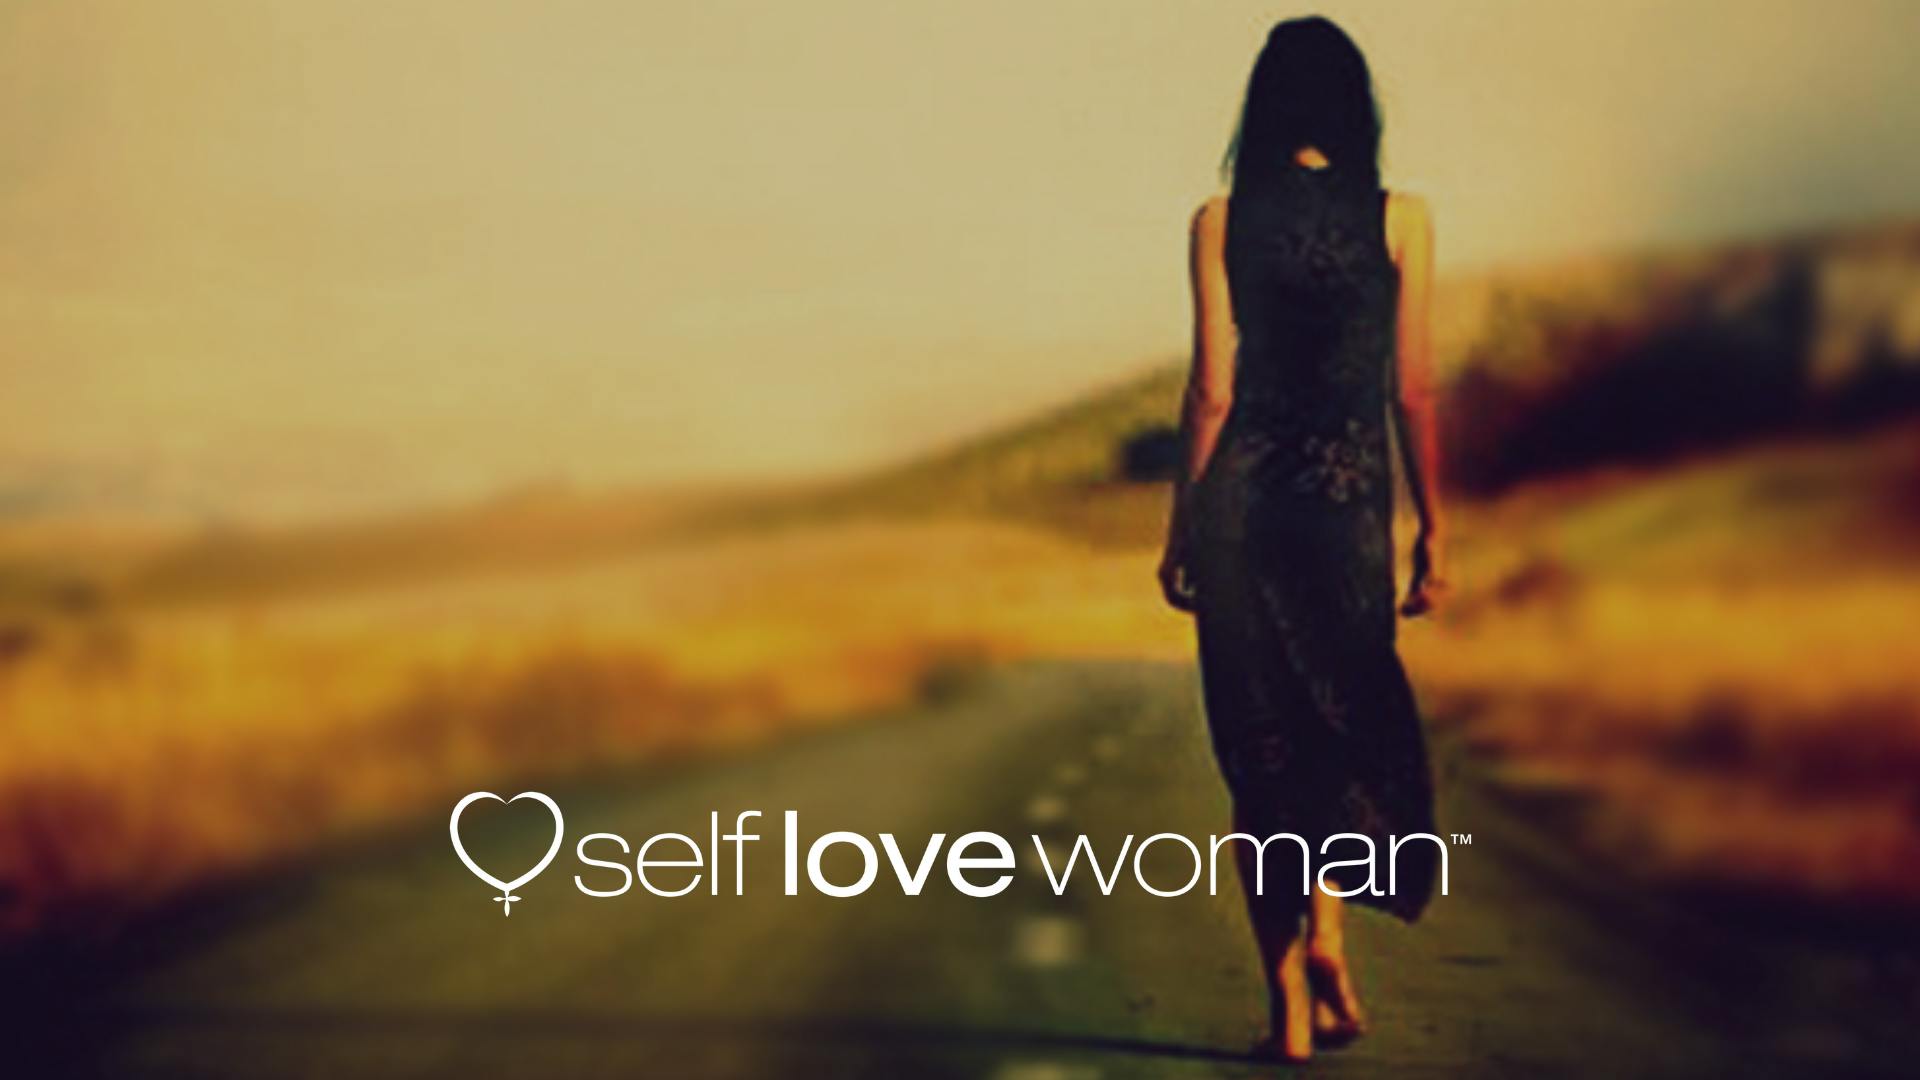 SELF LOVE WOMAN | FREE EXPERIENTIAL EVENING | 17 OCT OR 21 NOV